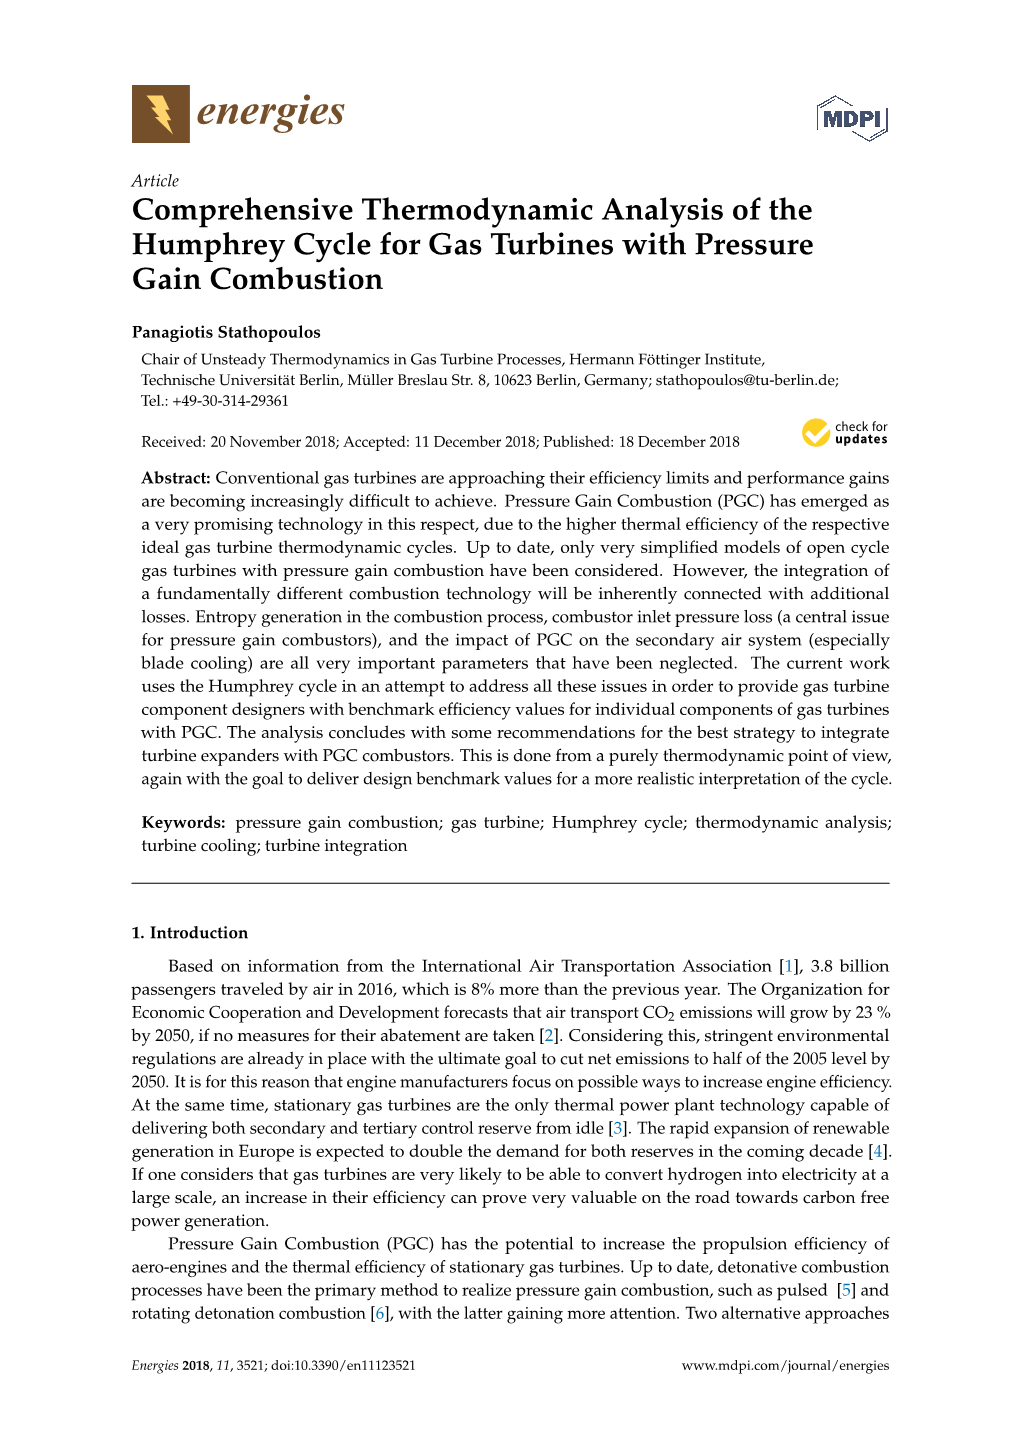 Comprehensive Thermodynamic Analysis of the Humphrey Cycle for Gas Turbines with Pressure Gain Combustion